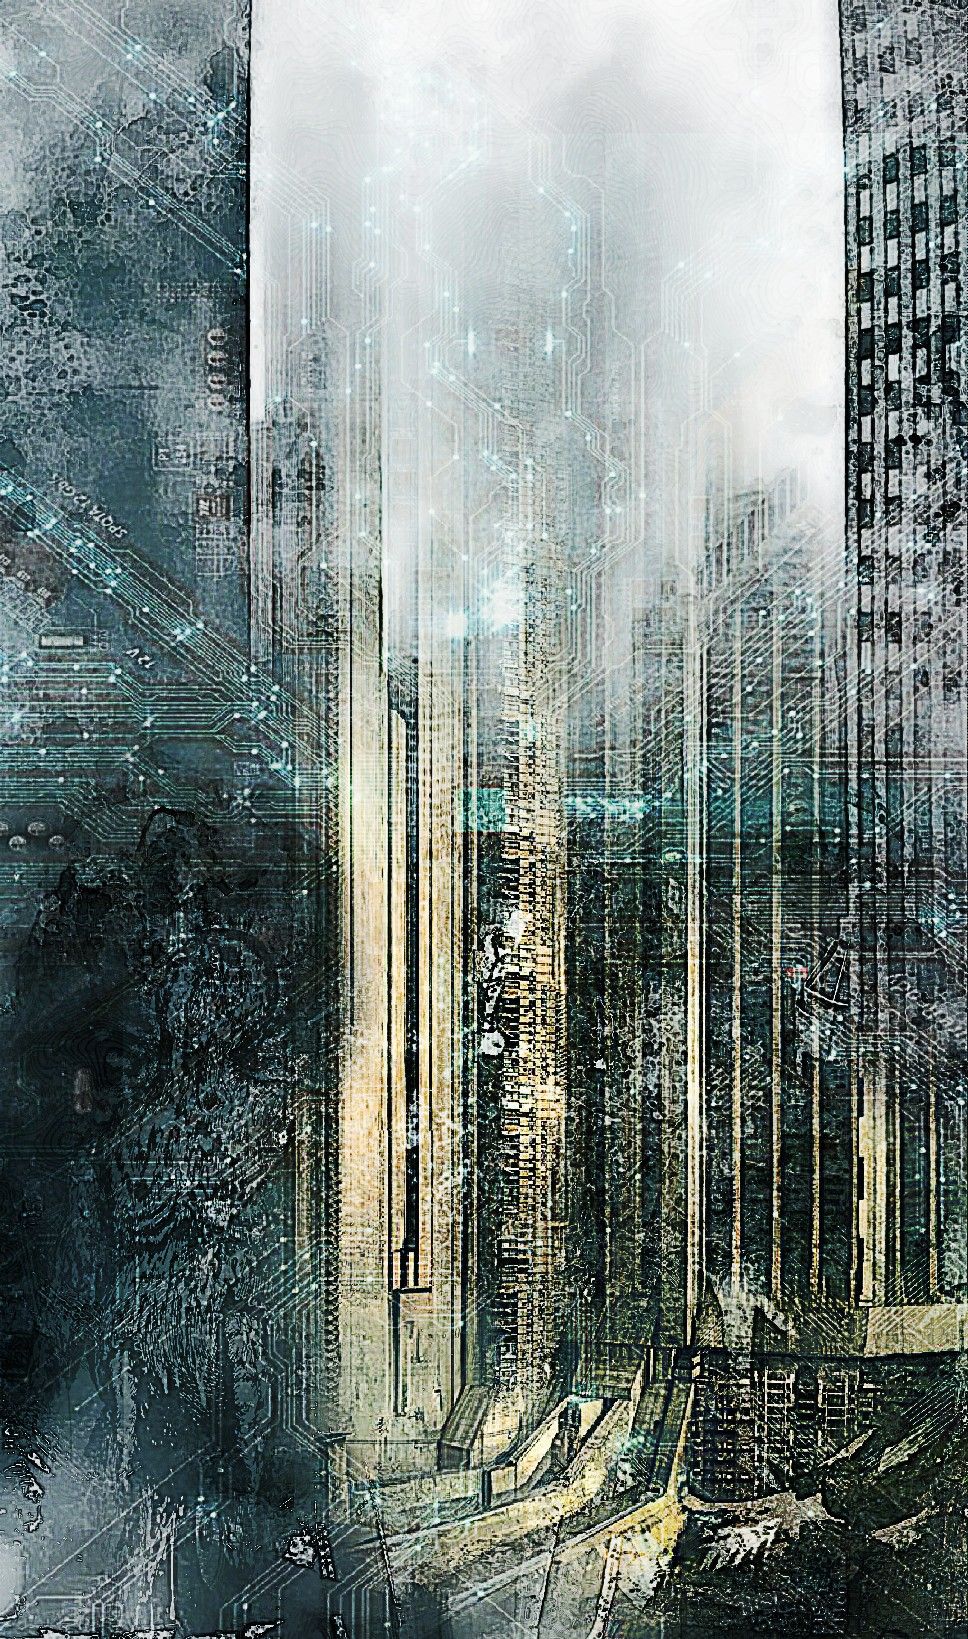 Background Dystopian City By Wallpaper iPhone